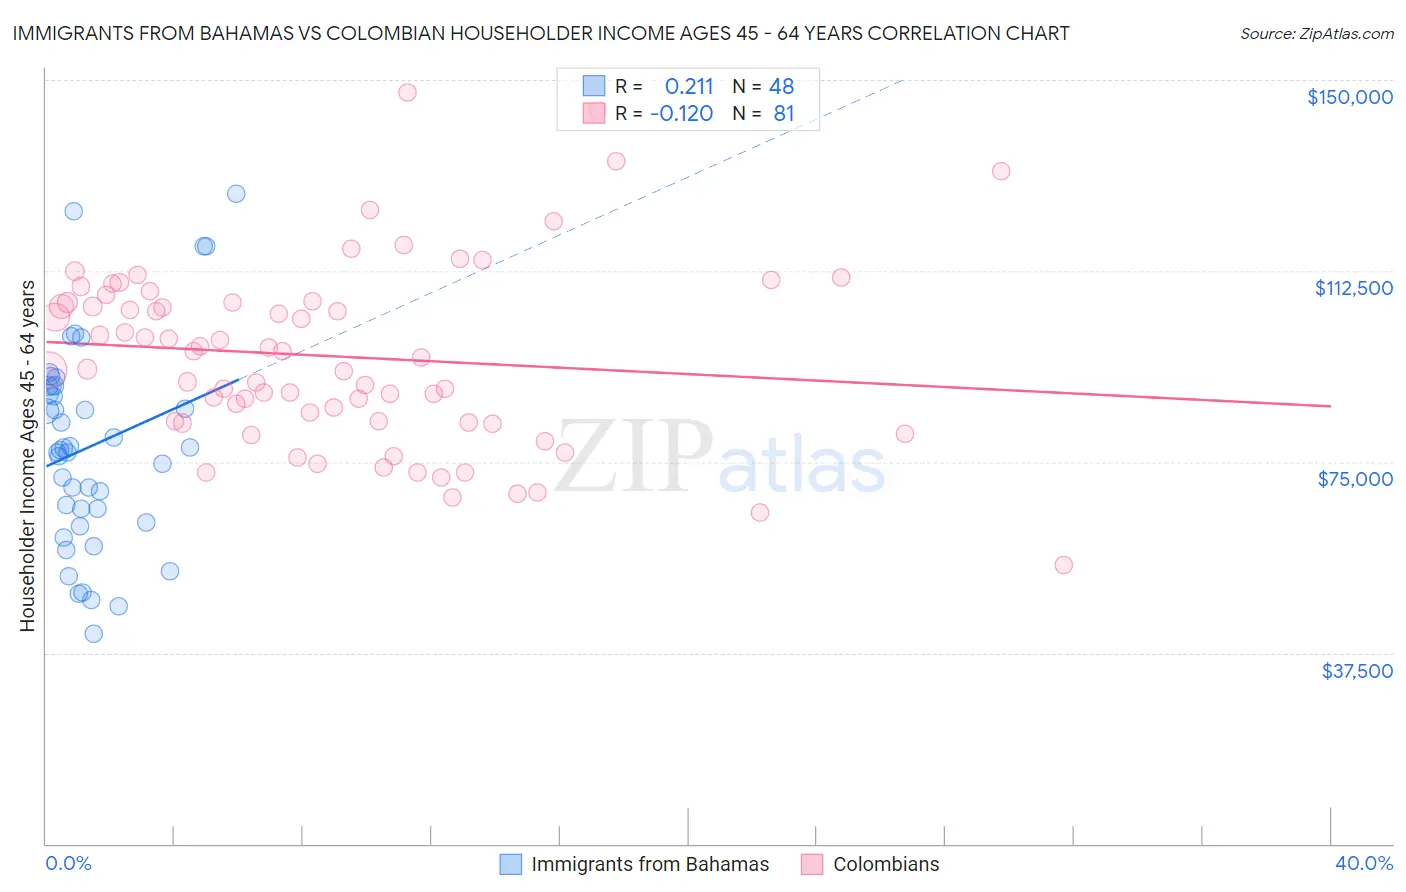 Immigrants from Bahamas vs Colombian Householder Income Ages 45 - 64 years